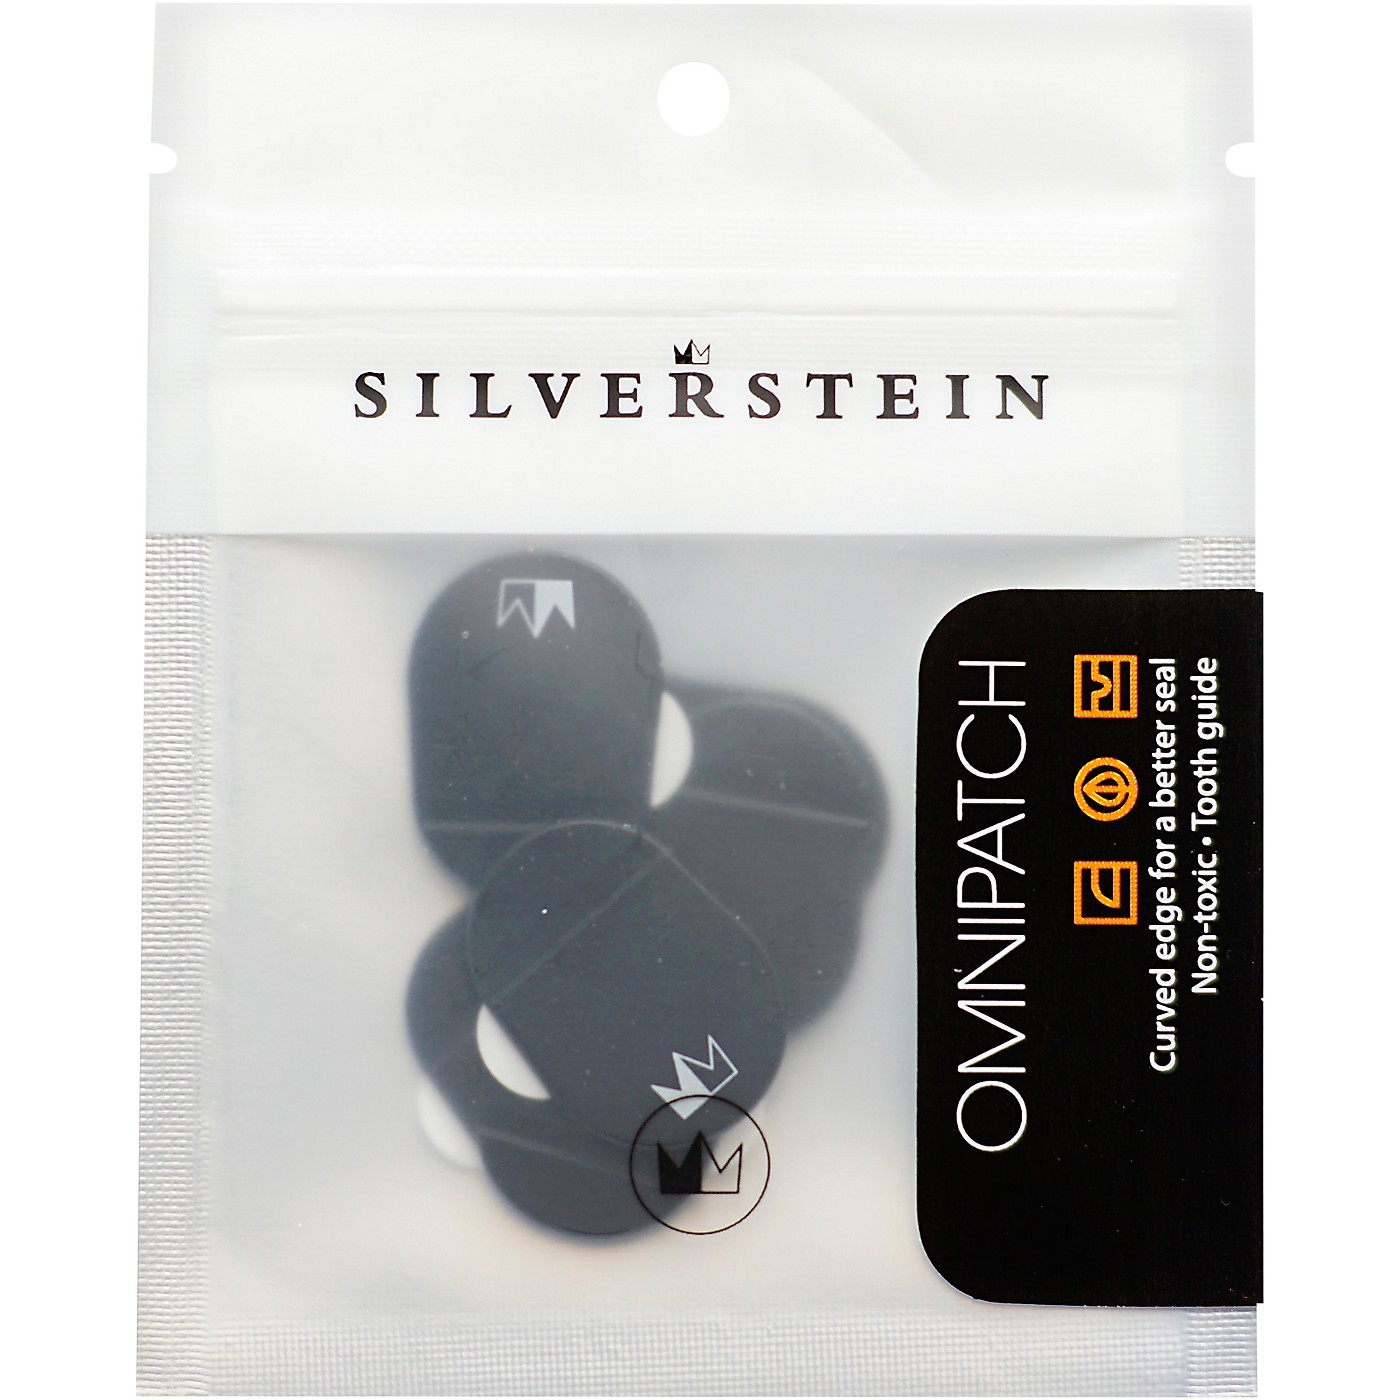 Silverstein Works OmniPatch Mouthpiece Patch thumbnail